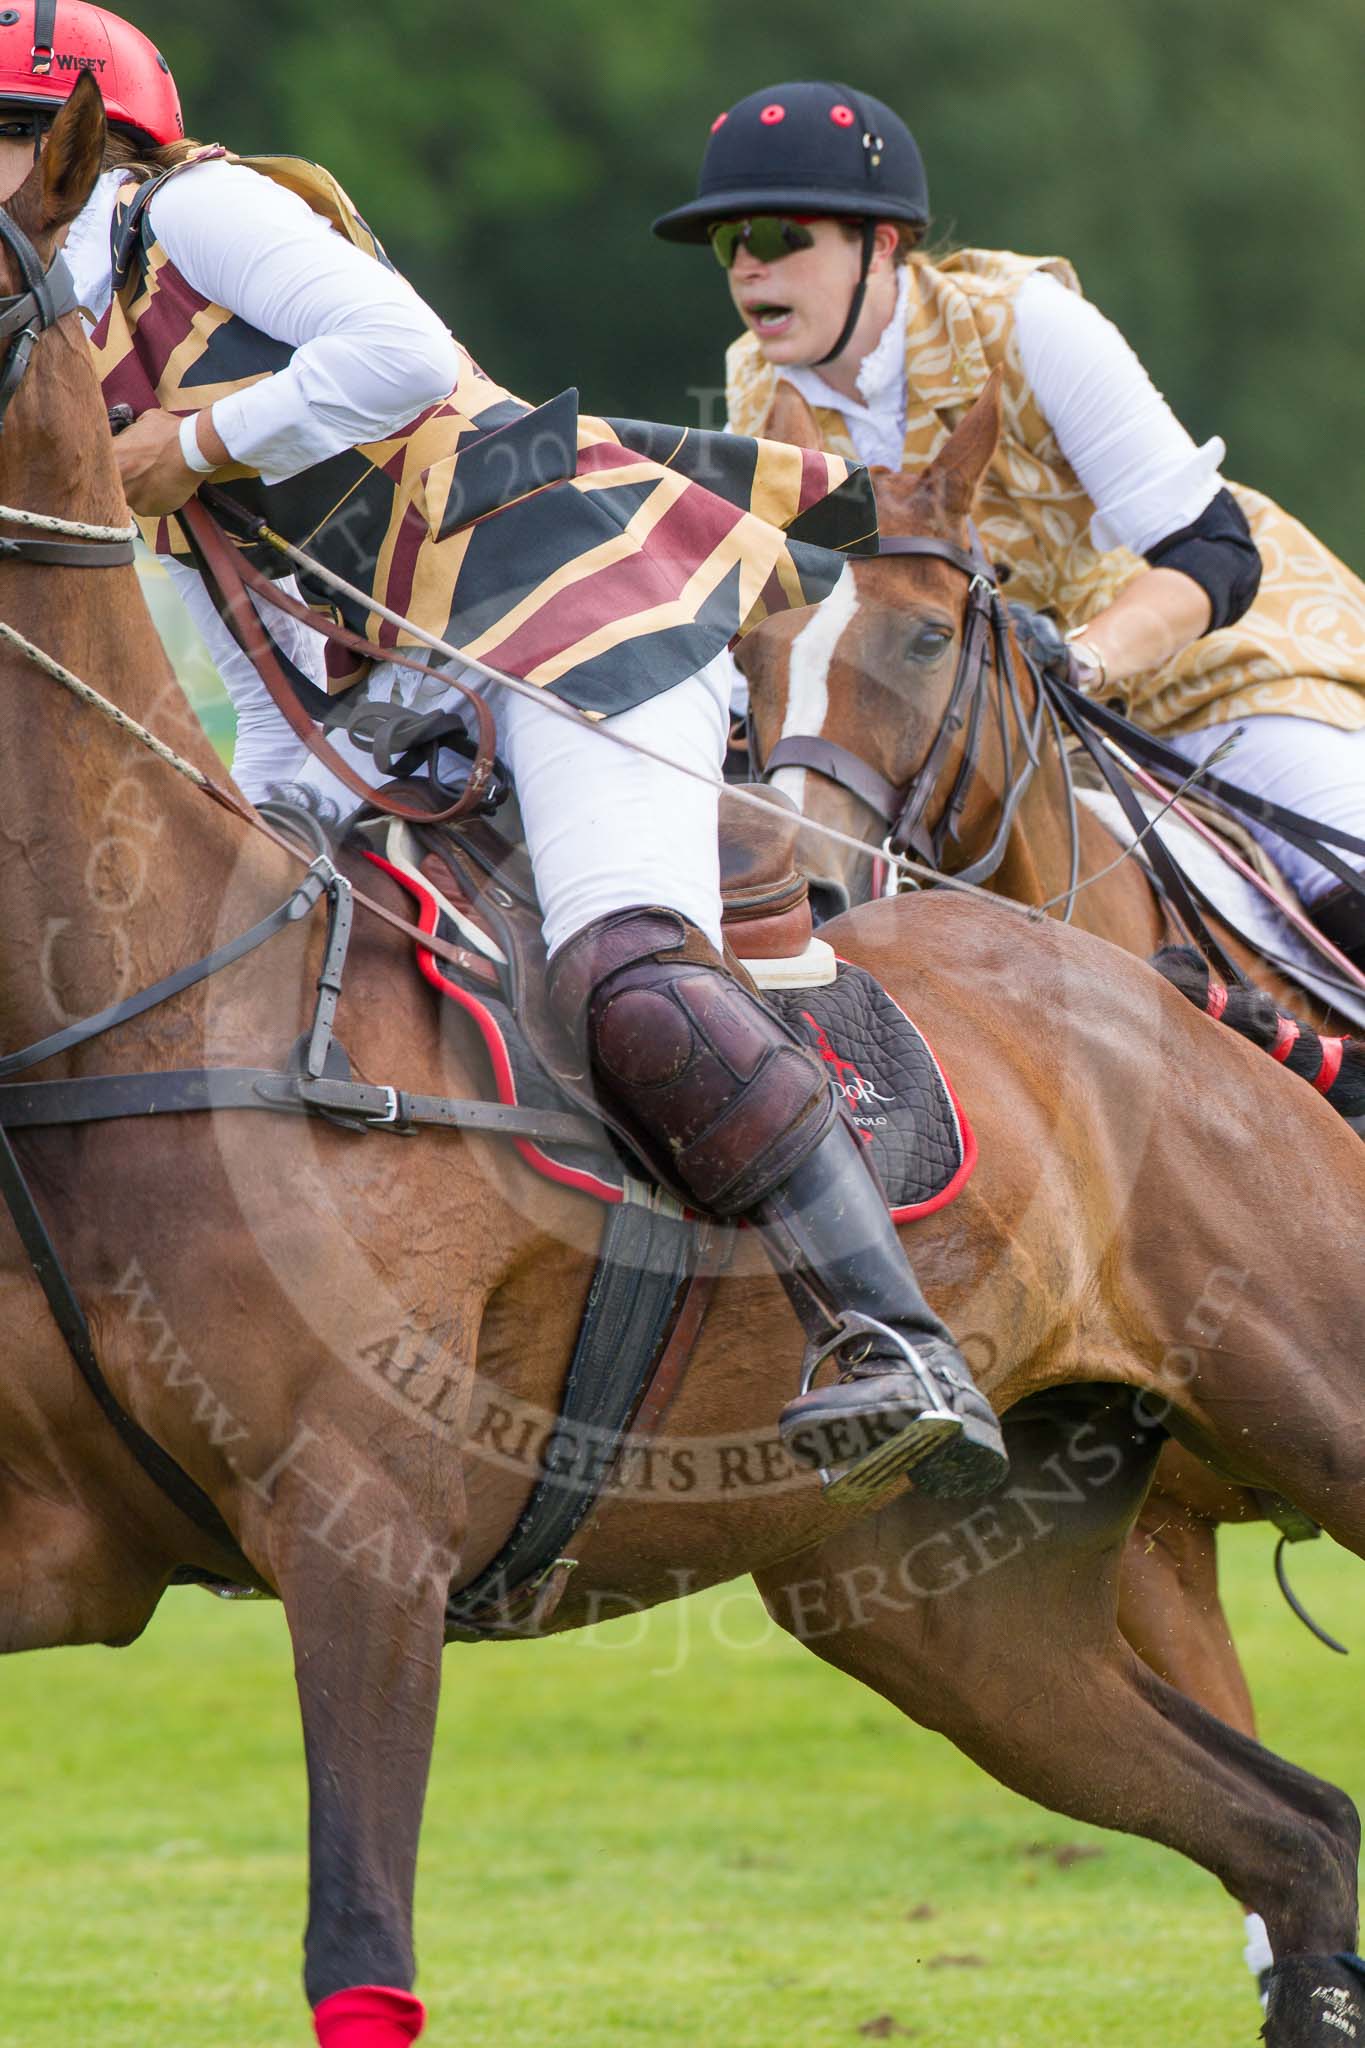 7th Heritage Polo Cup semi-finals: Speed, skill and courage shown here by Sarah Wisman & Heloise Lorentzen..
Hurtwood Park Polo Club,
Ewhurst Green,
Surrey,
United Kingdom,
on 04 August 2012 at 13:33, image #154